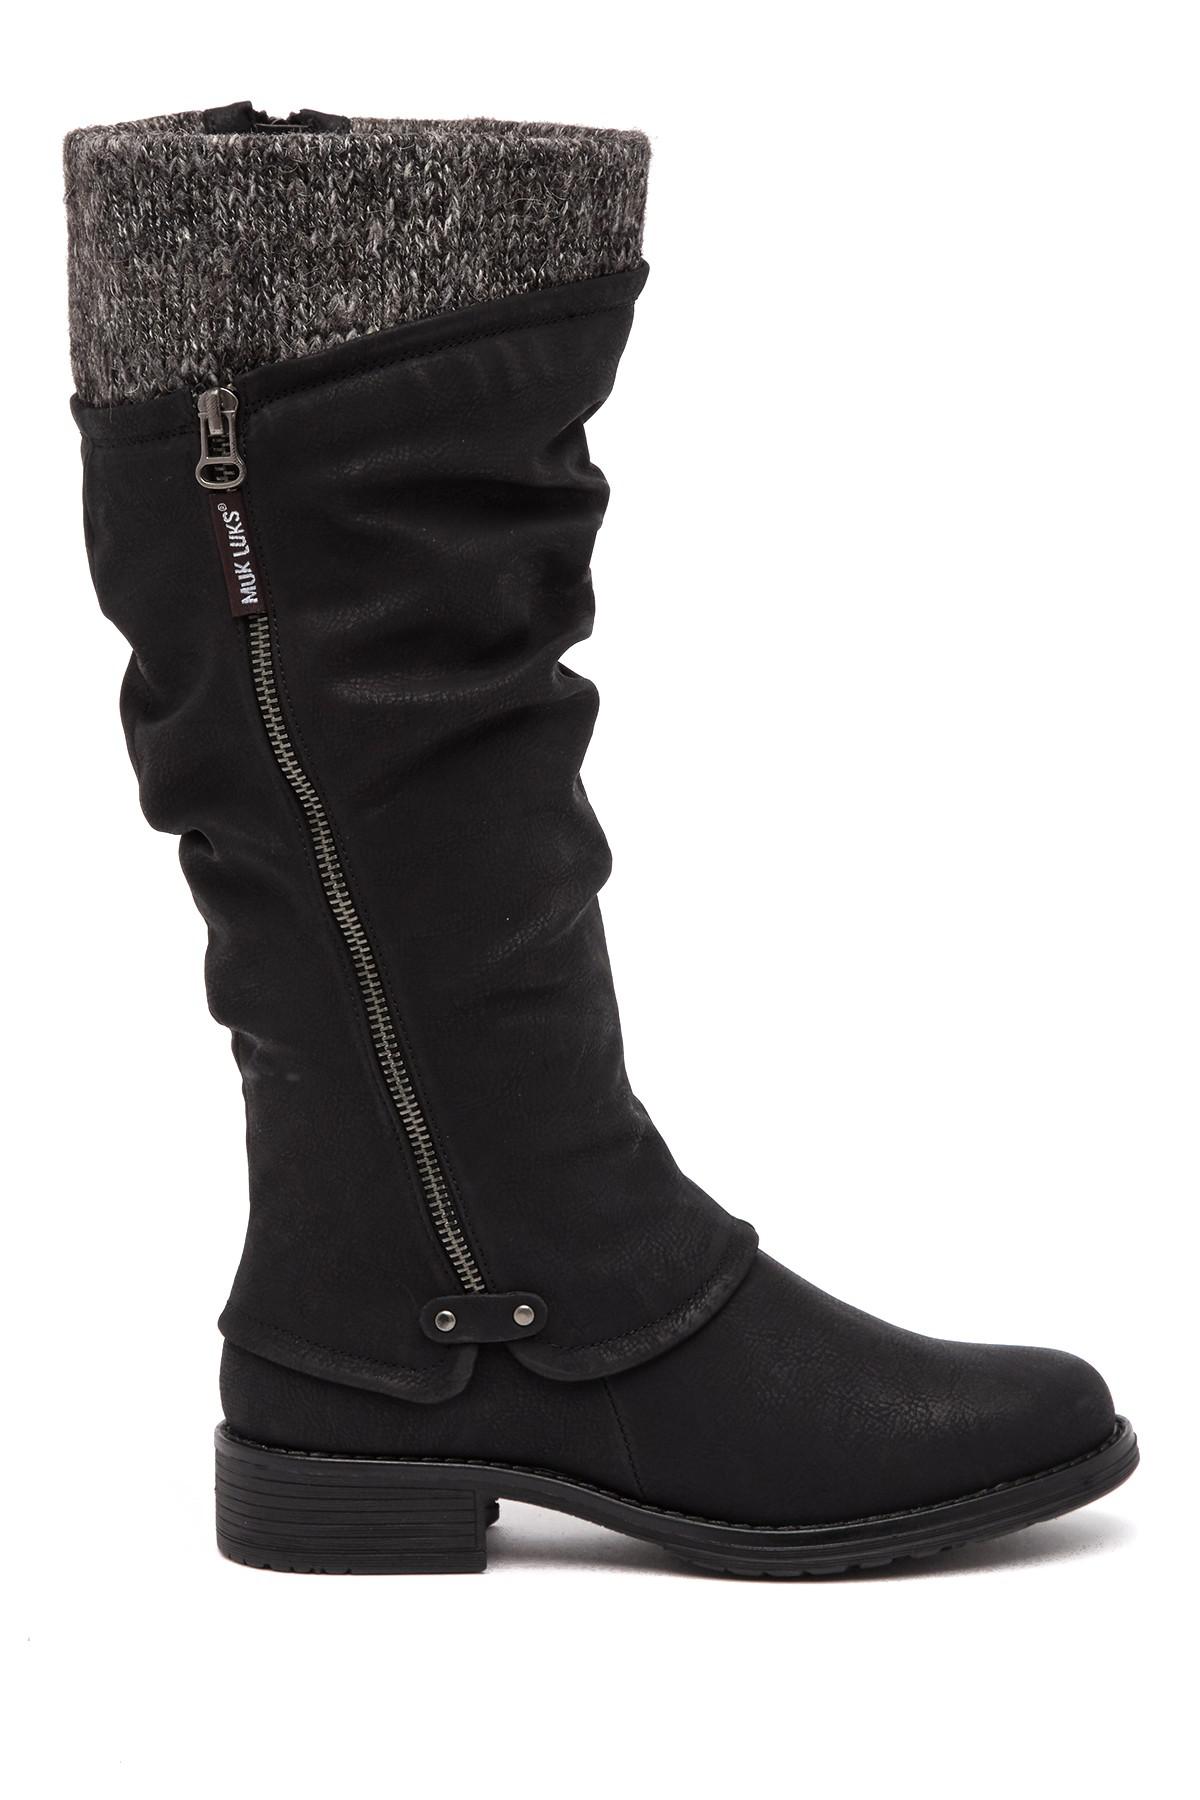 Lyst - Muk Luks Brianna Faux Fur Lined Boot in Black